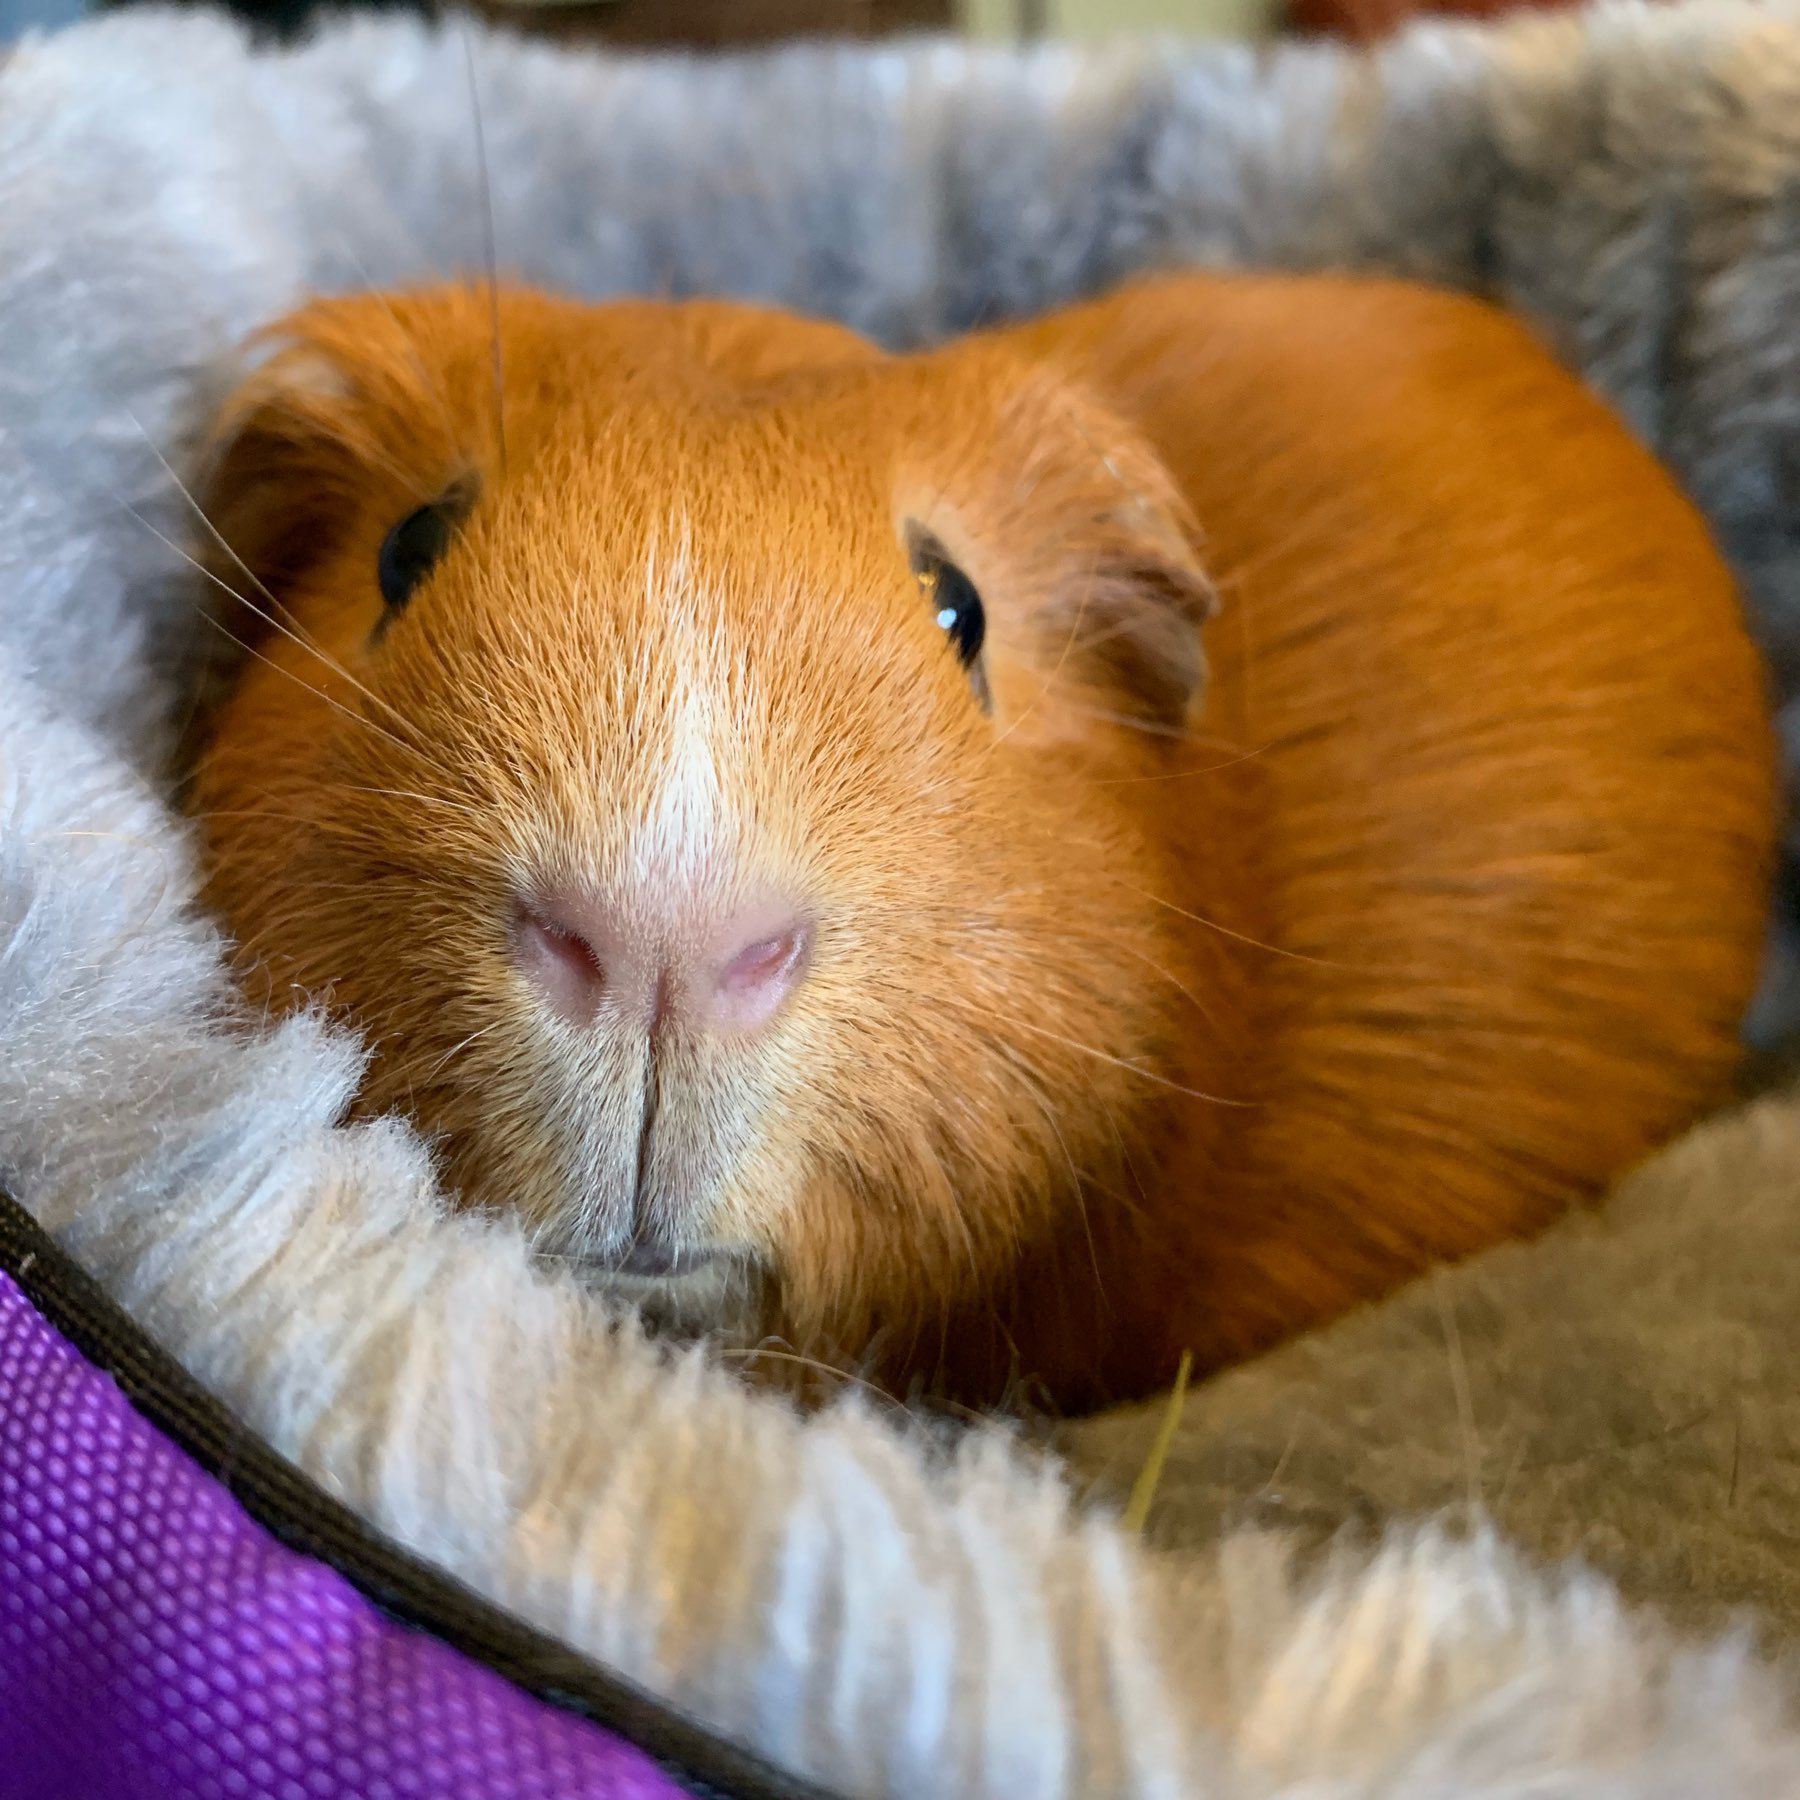 a reddish-brown guinea pig in a grey and purple bed.